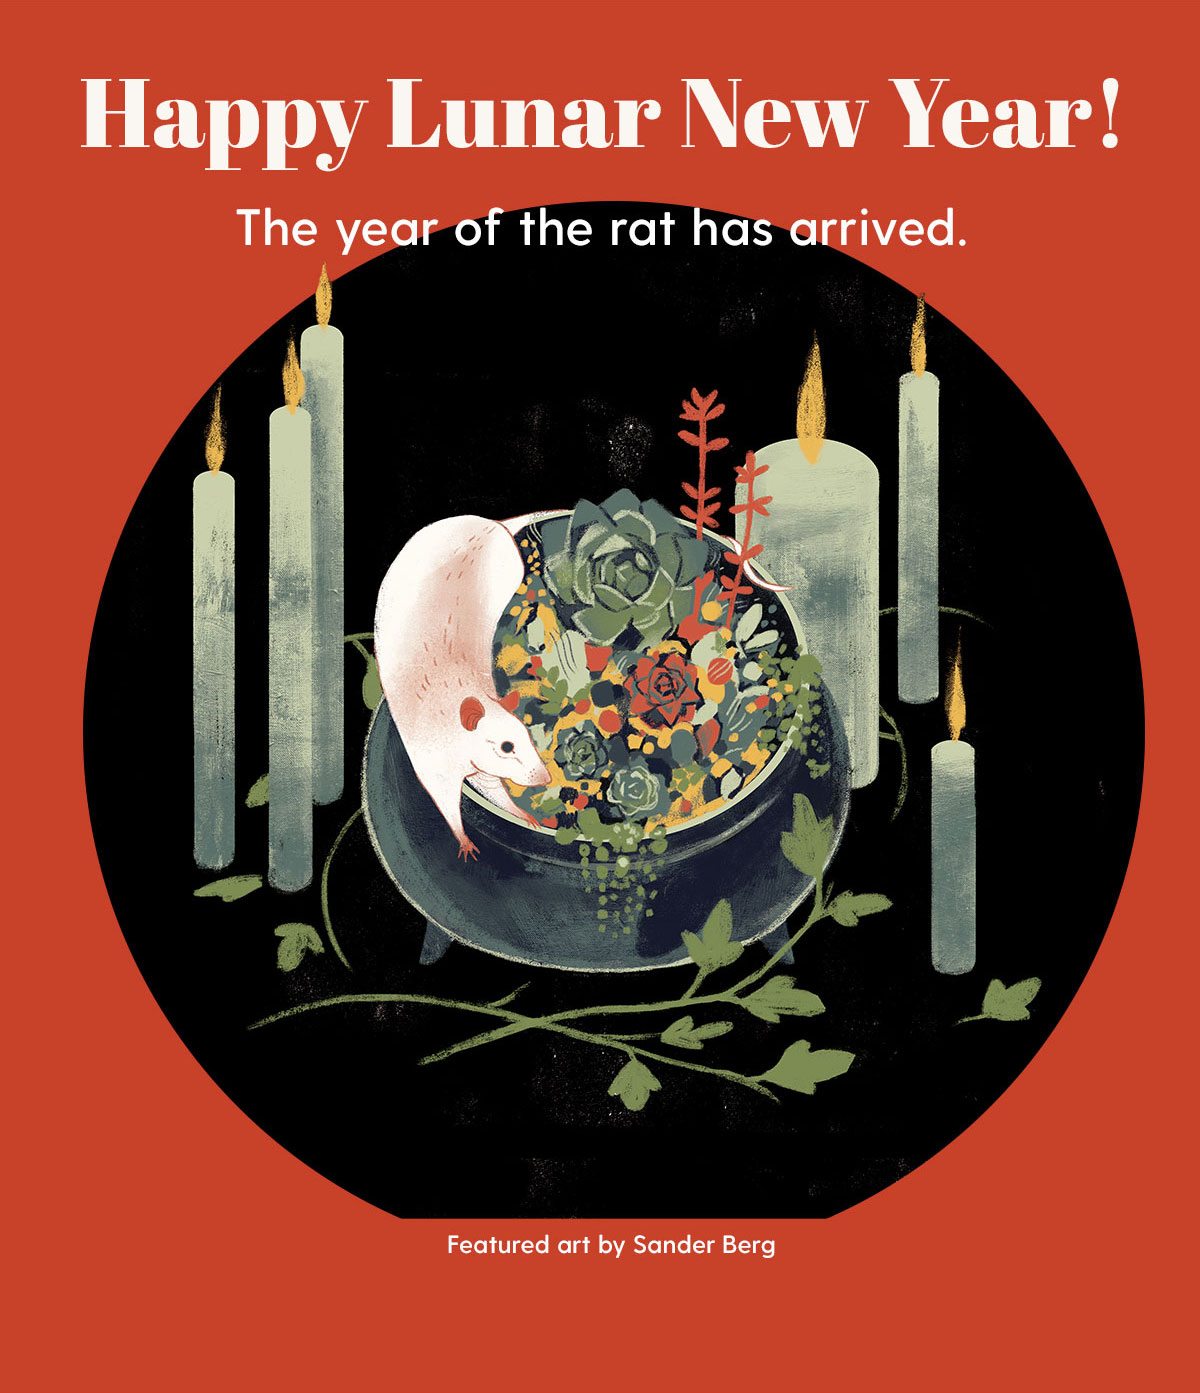 Happy Lunar New Year! The year of the rat has arrived. Featured art by Sander Berg